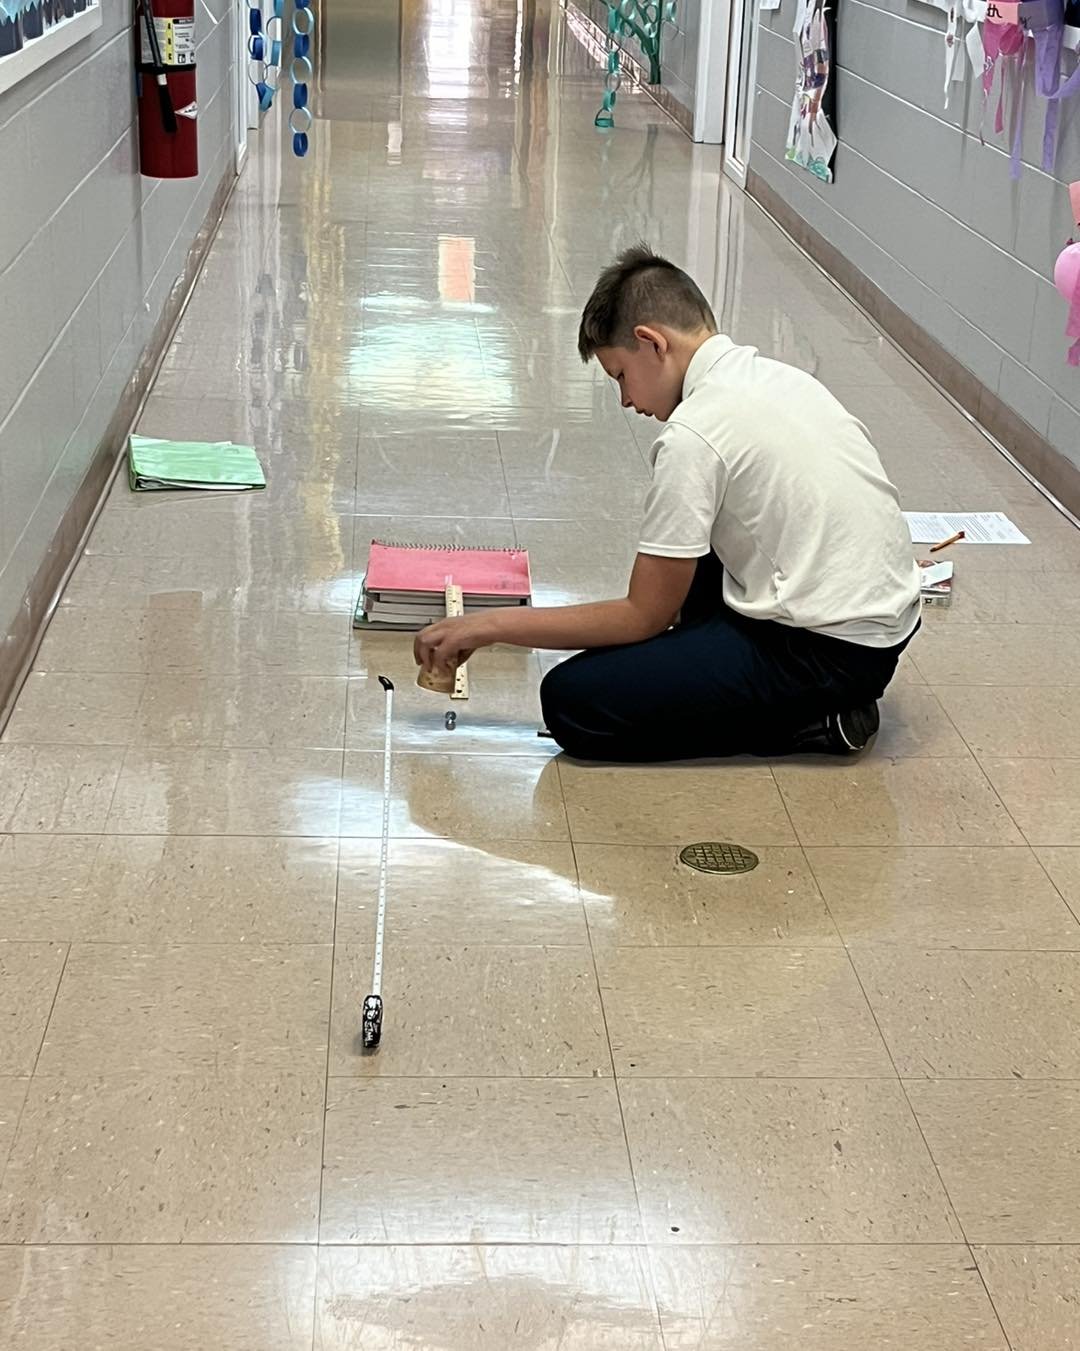 In 5th grade studying physics means experiments! The students are learning about gravity, motion, force and other elements of physics.  #fca #science #physics #motion #school #stem #steam